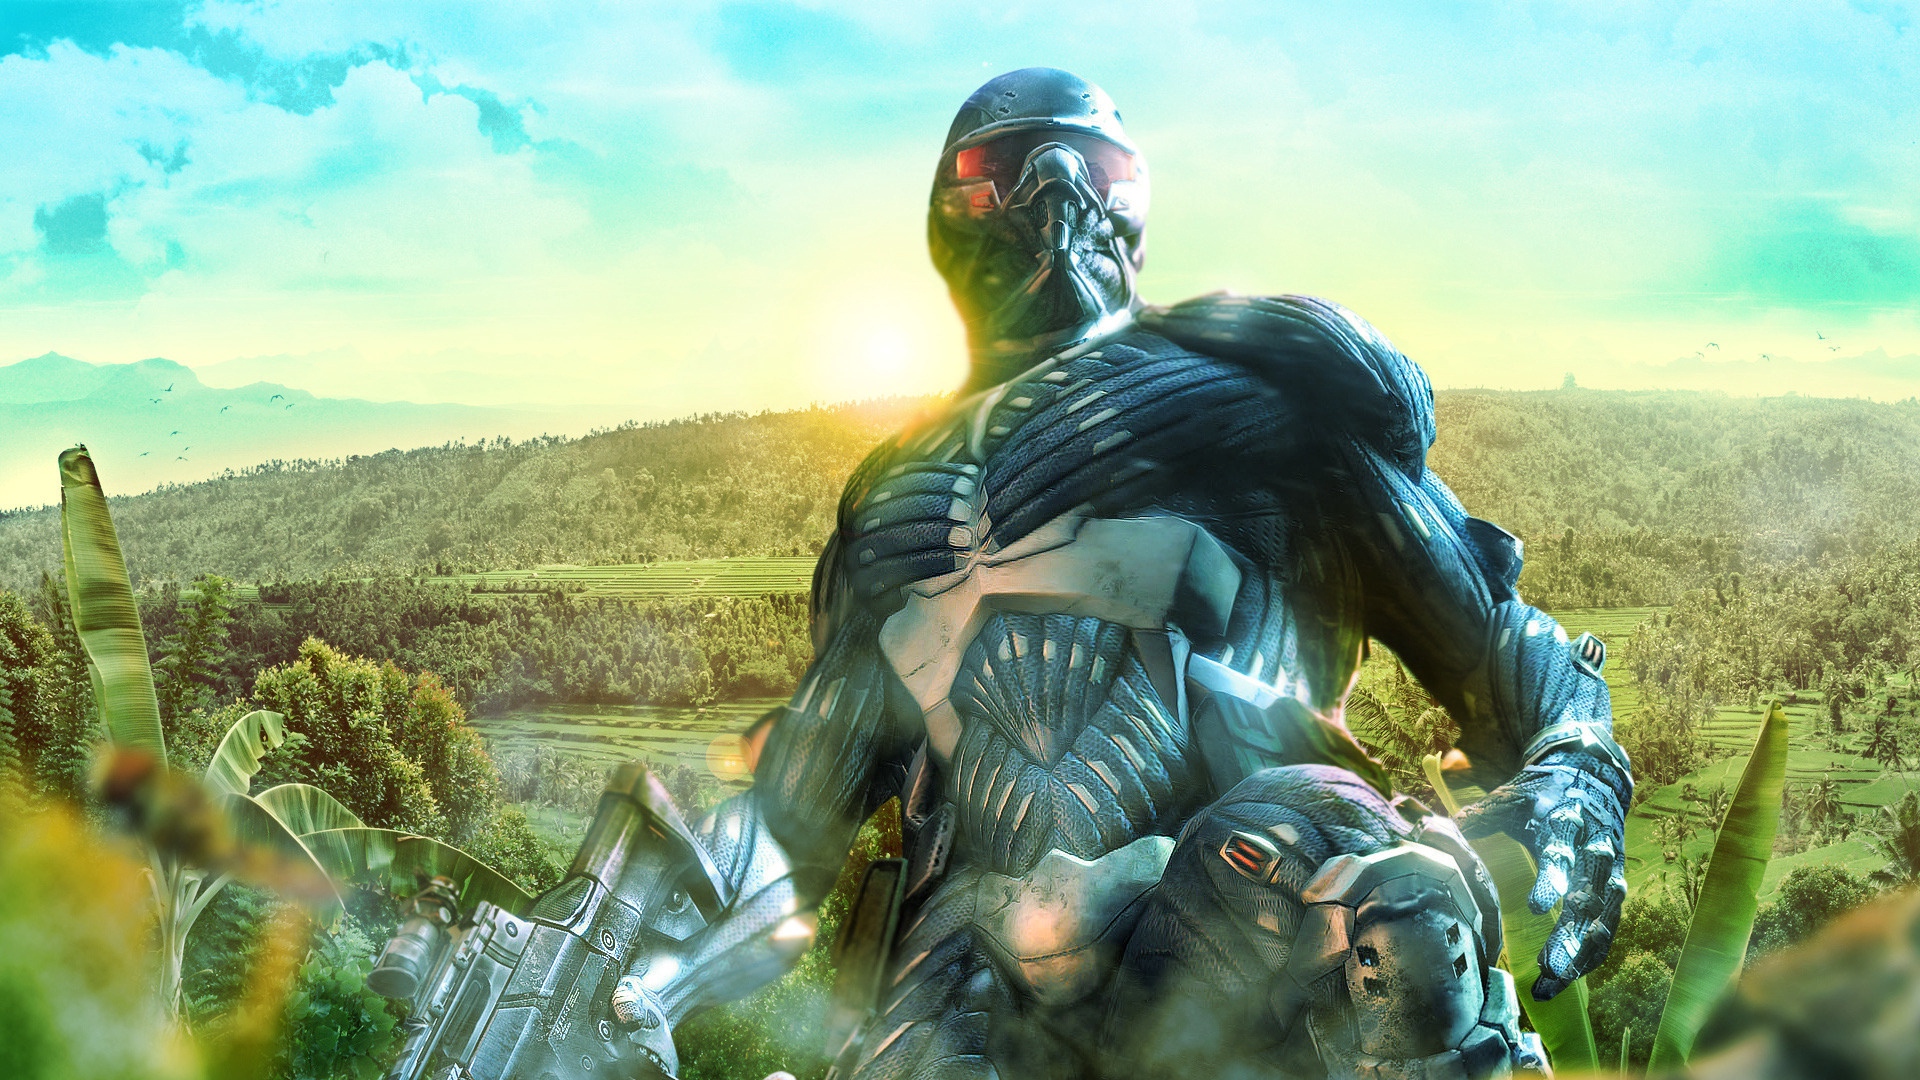 Wallpaper Crysis, Soldiers, Art, Nature, Jungle - Crysis 3 , HD Wallpaper & Backgrounds